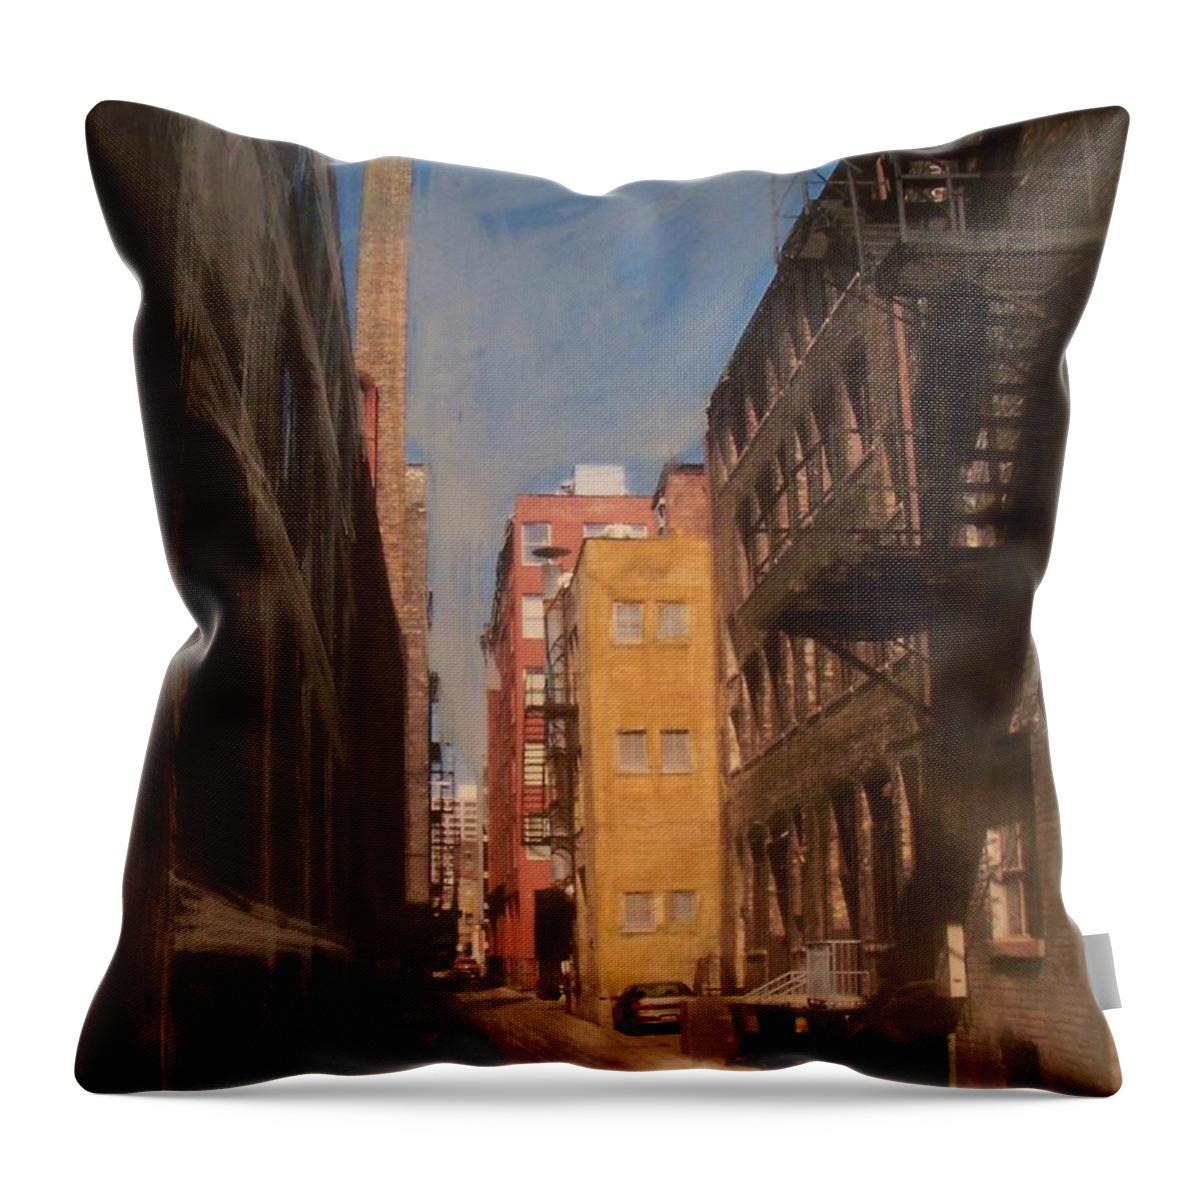 Alley Throw Pillow featuring the mixed media Alley Series 2 by Anita Burgermeister